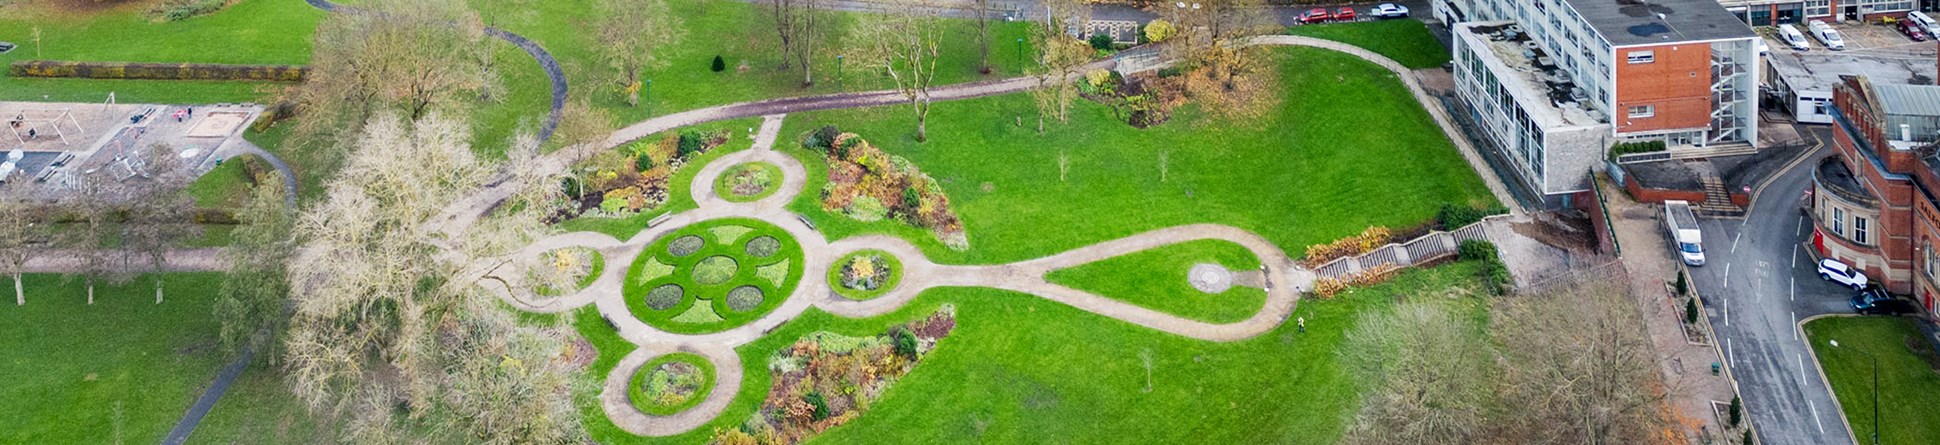 A city public park with gardens photographed from above